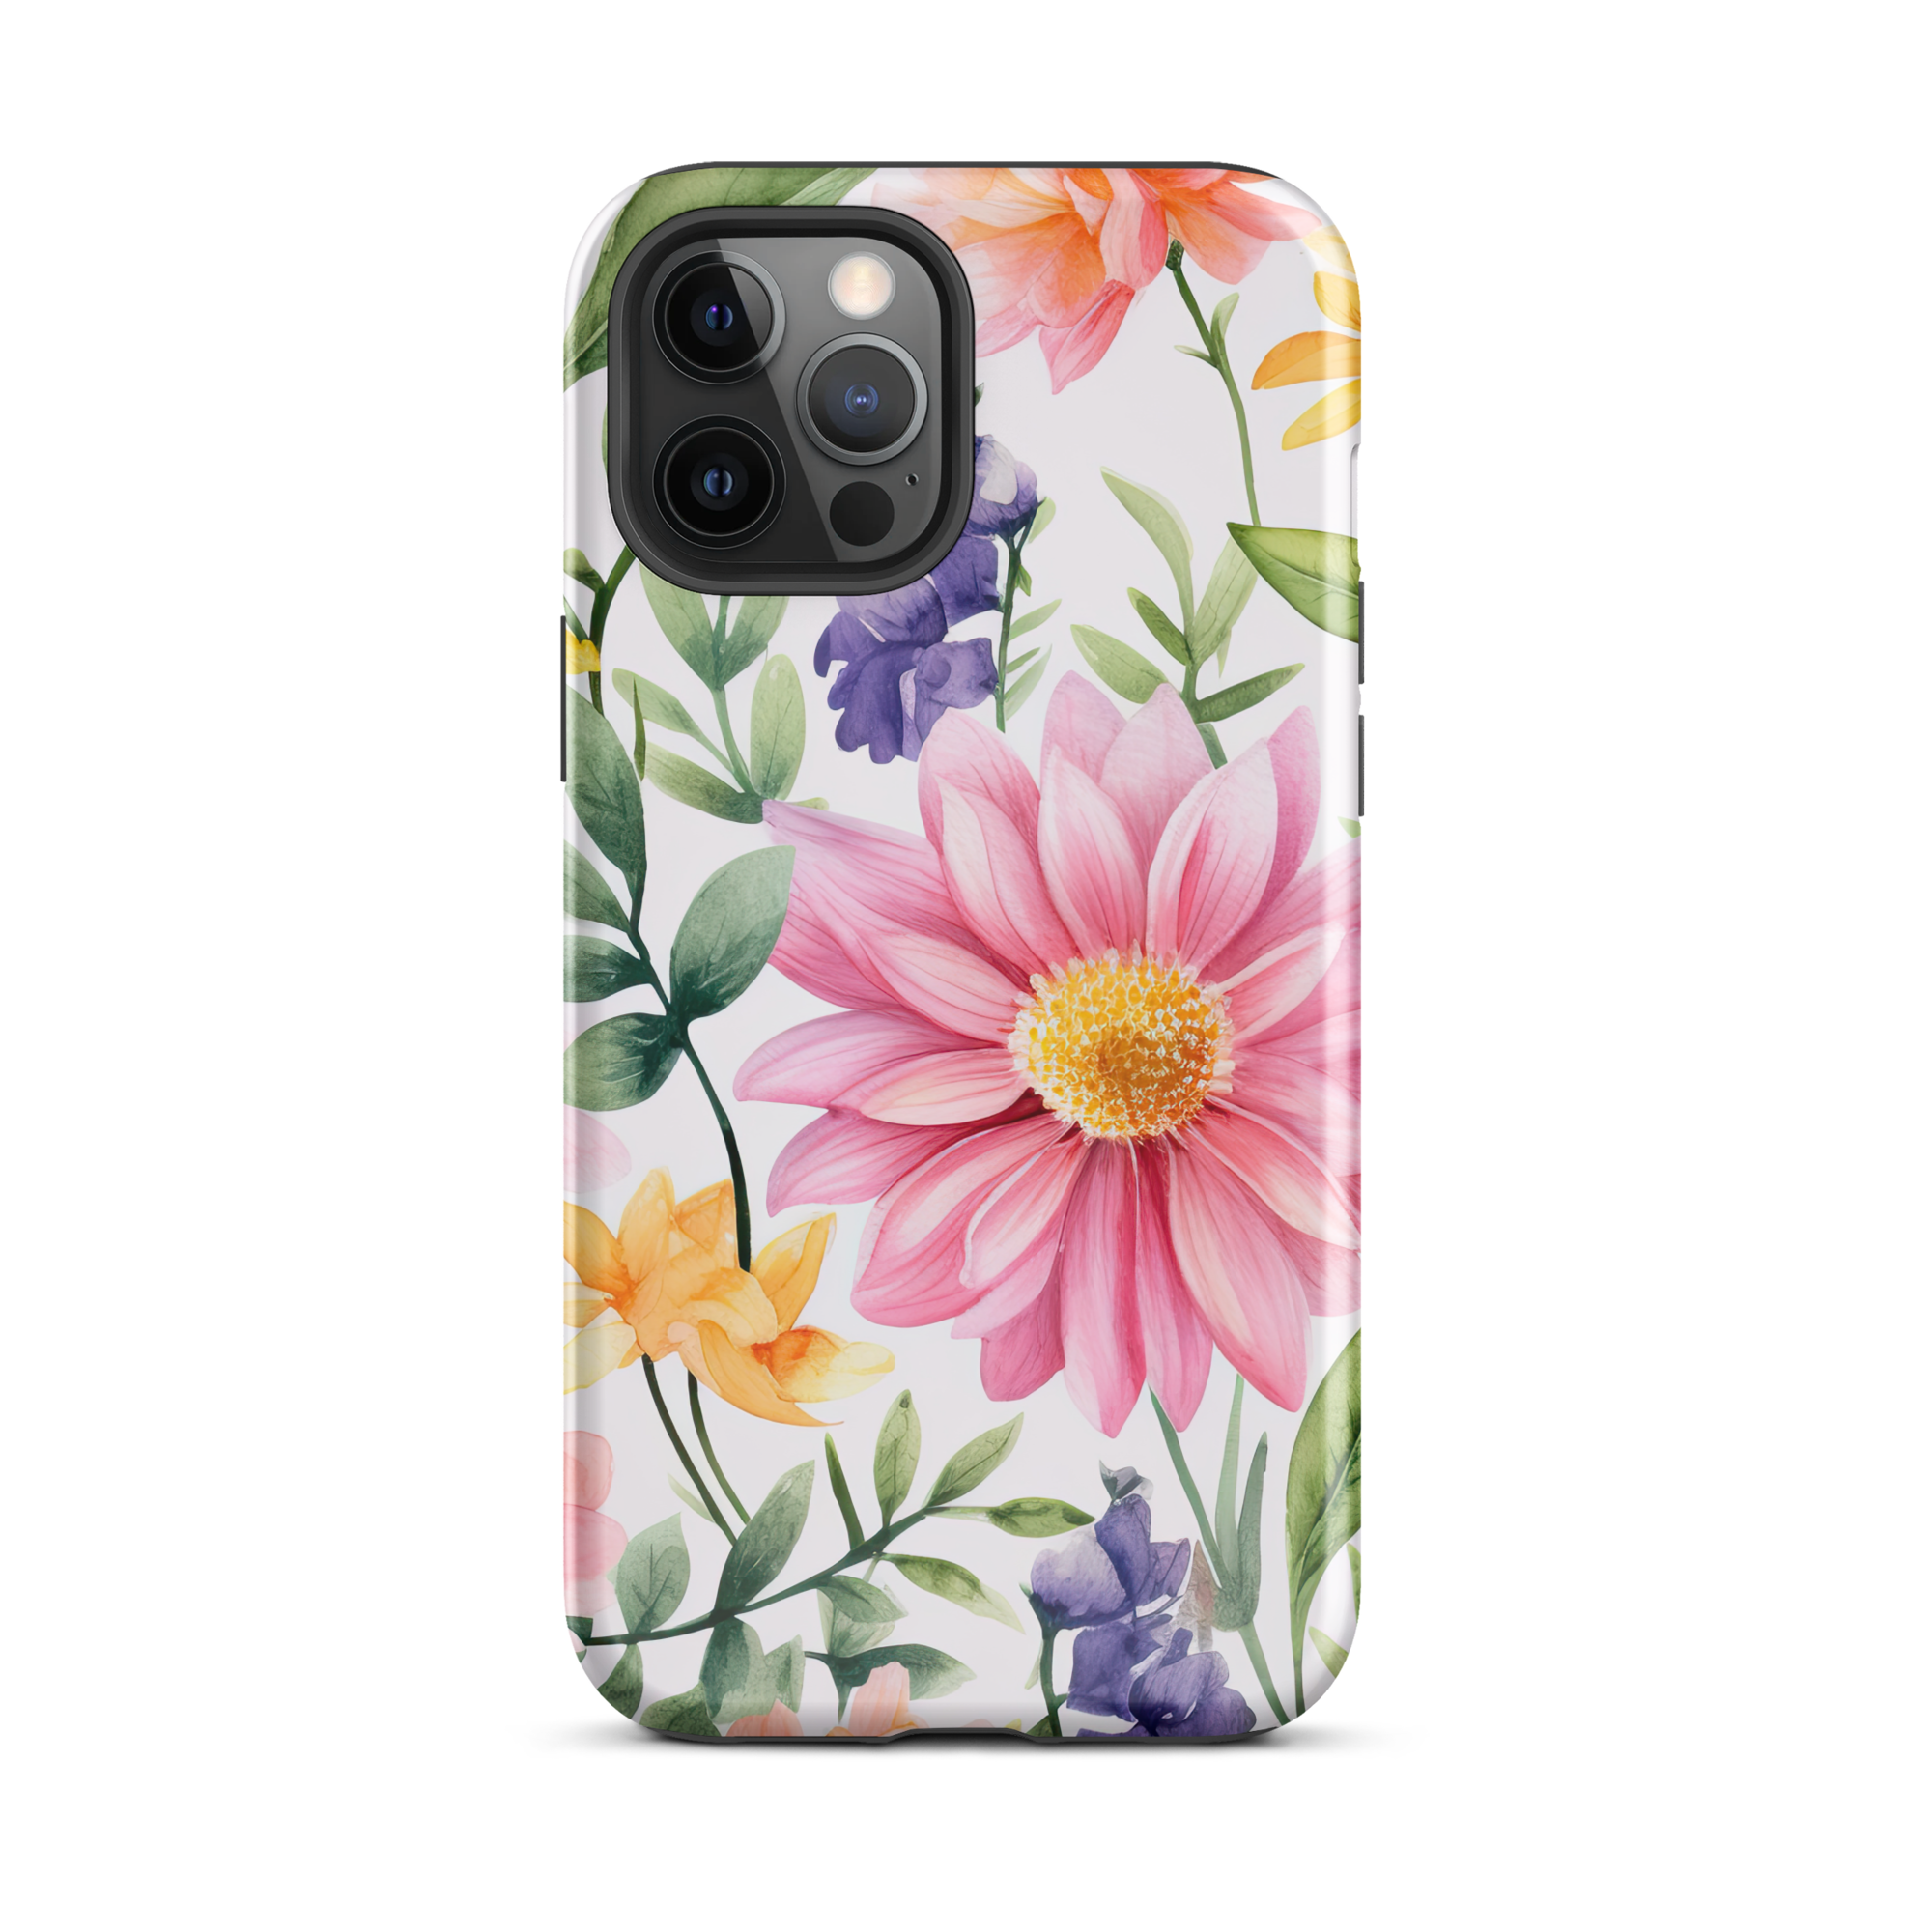 Spring Radiance iPhone 12 Pro Max Case